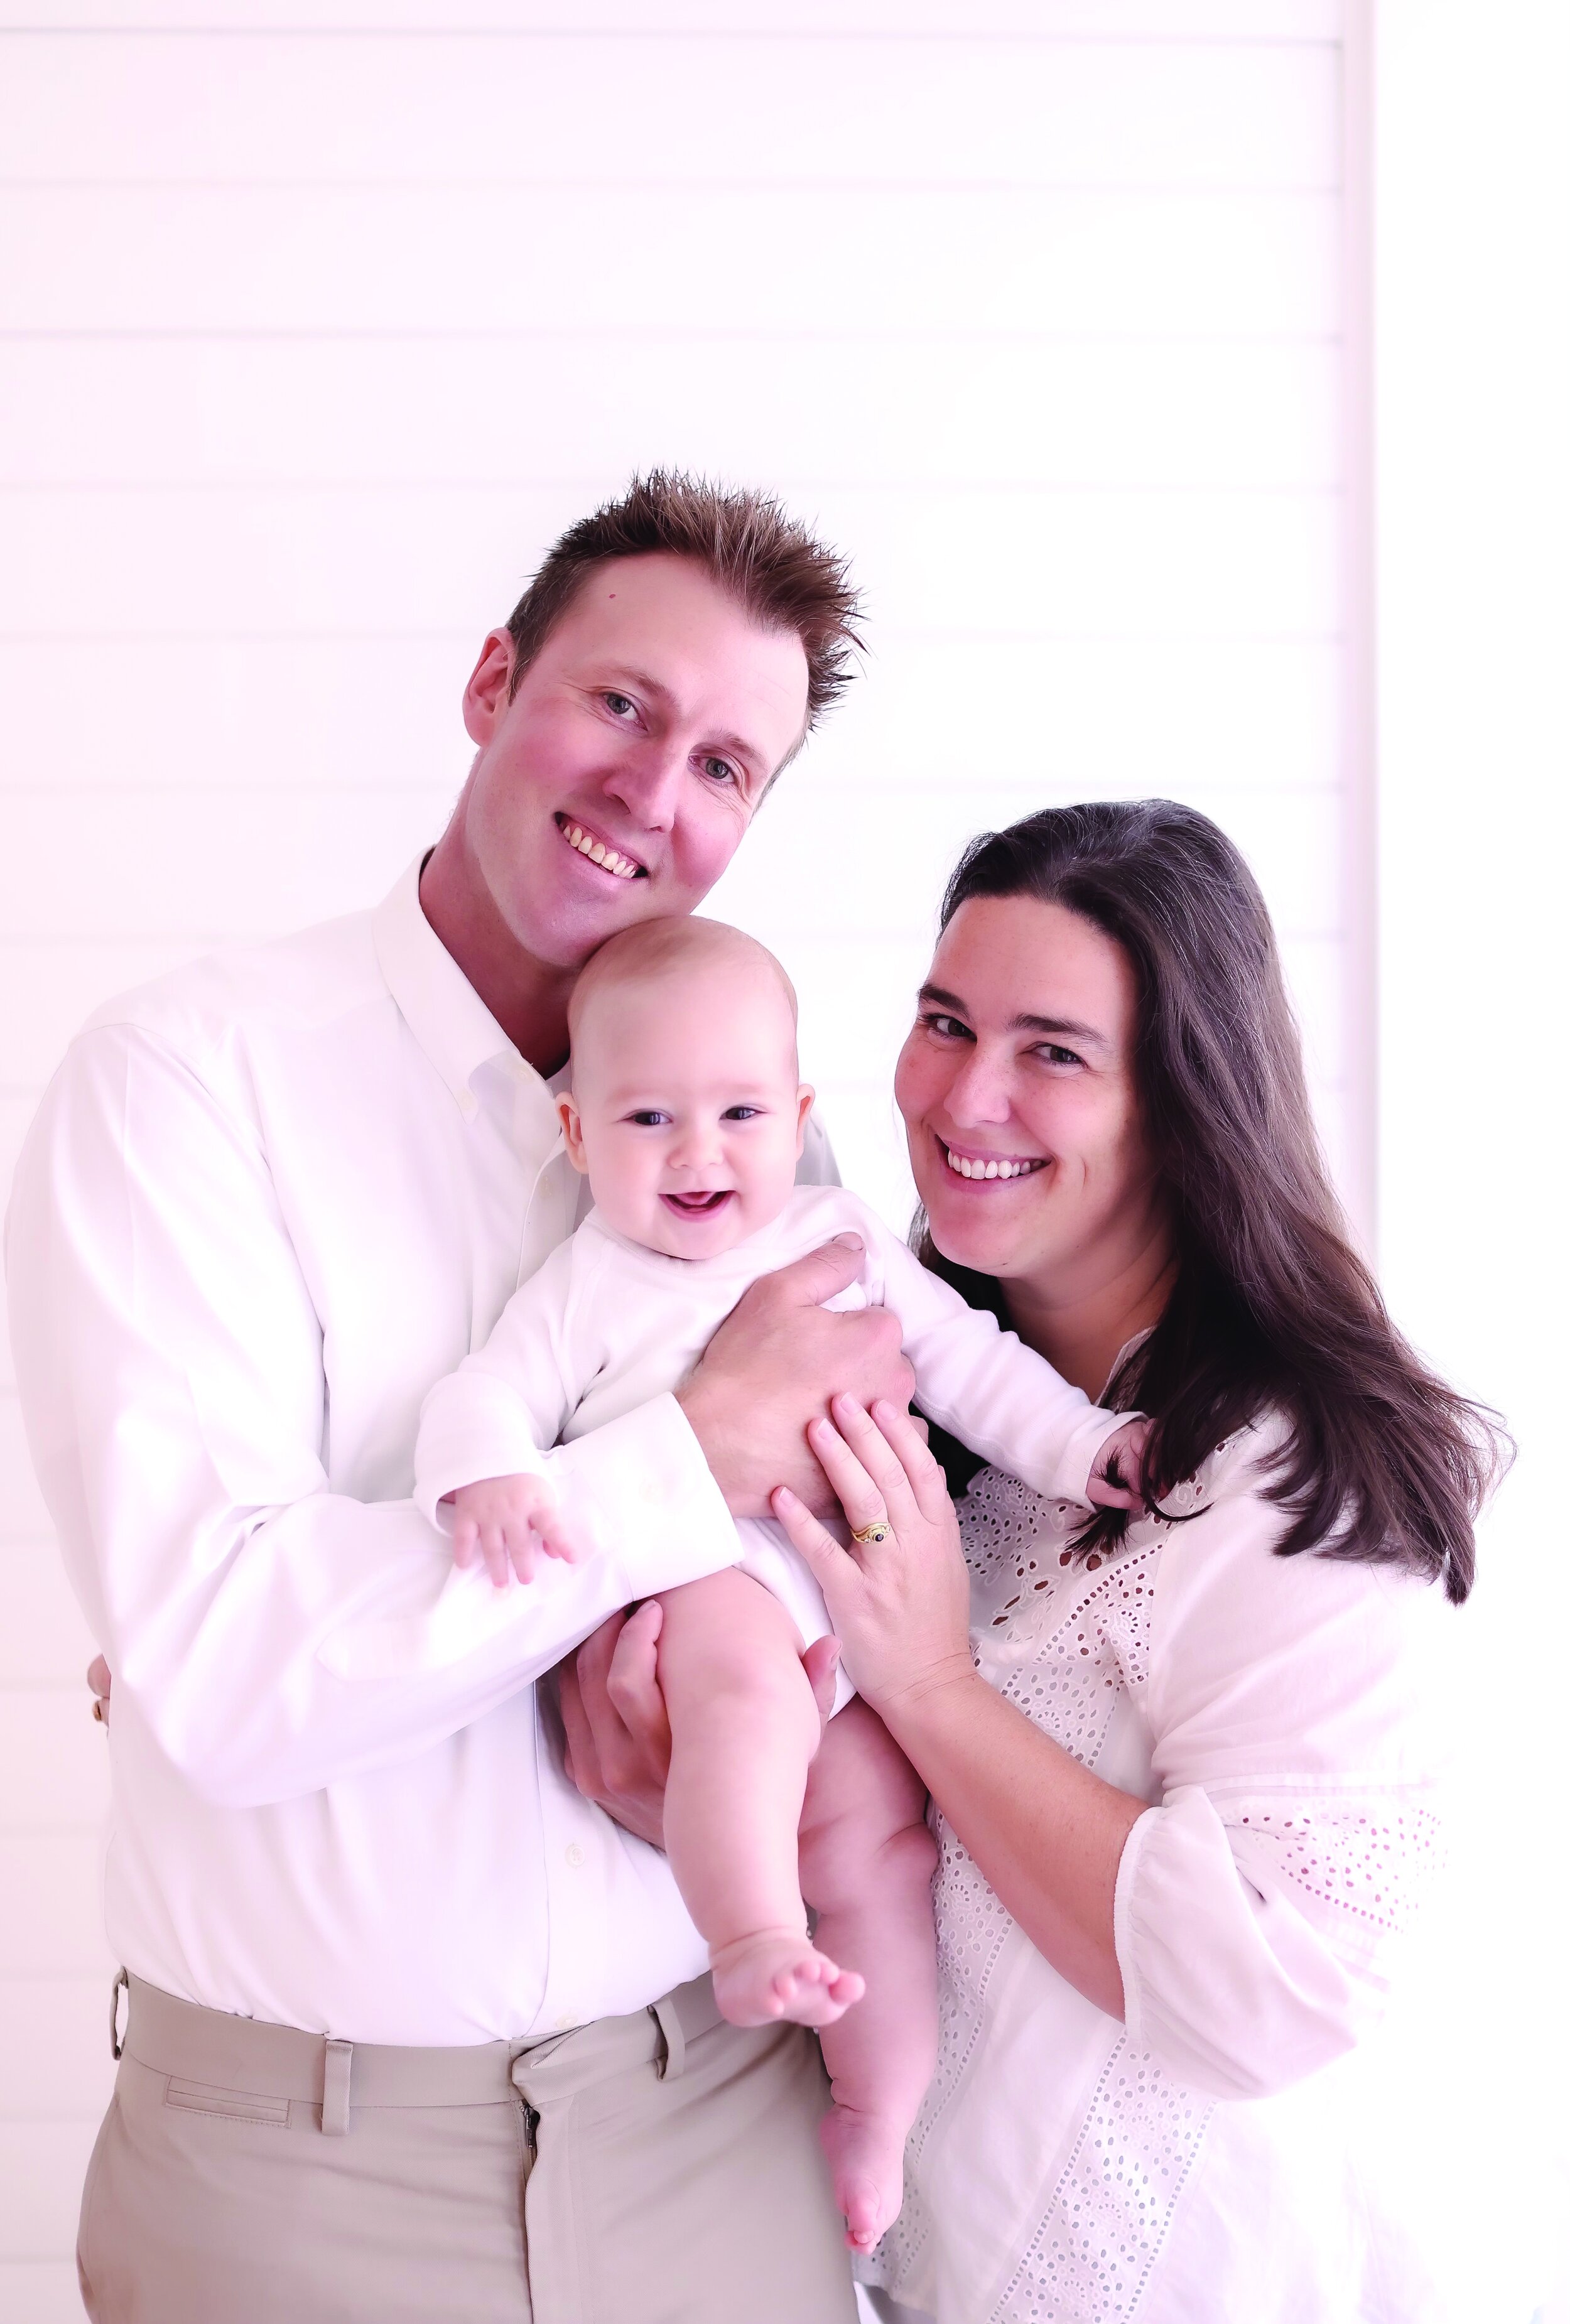 Julia Walker Thomas ’08 with her partner Adam and son Silas